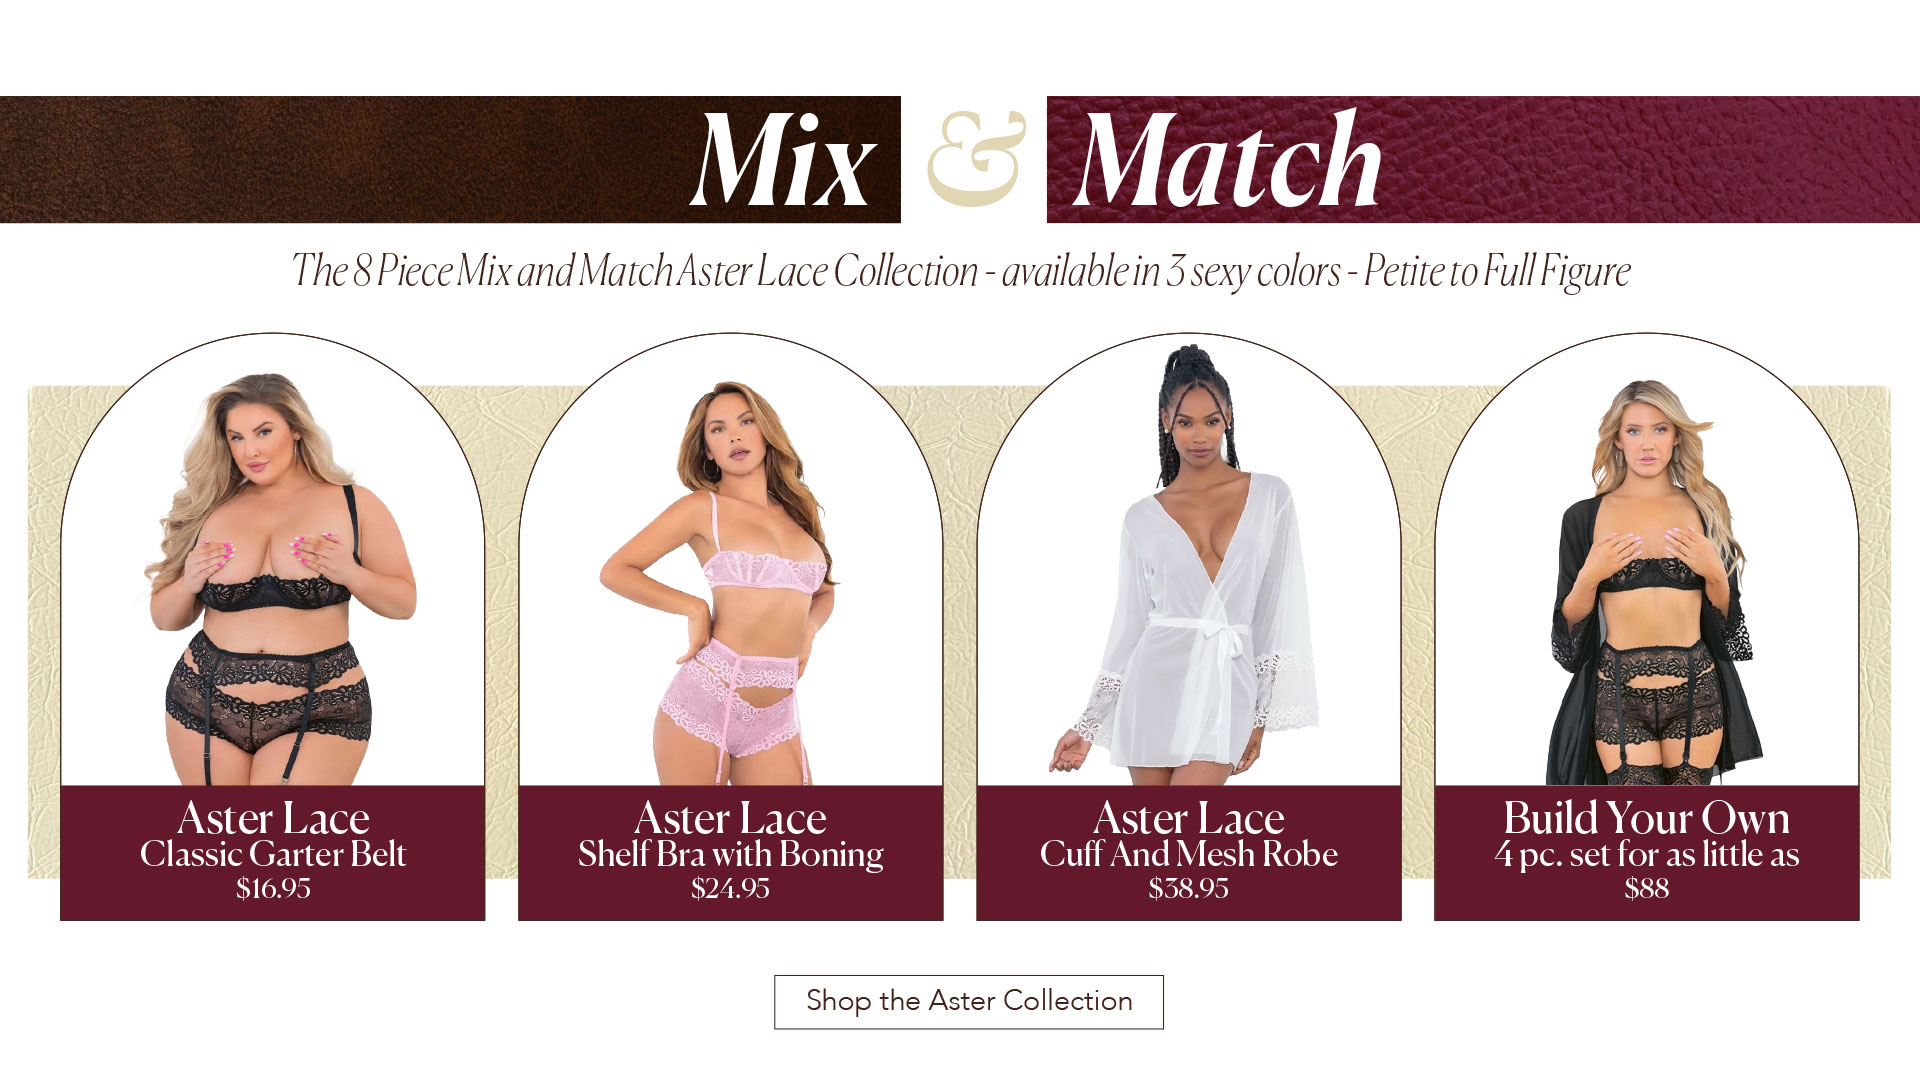 Mix and Match - The 8 Piece Mix and Match Aster Lace Collection - available in 3 sexy colors - Petite to Full Figure